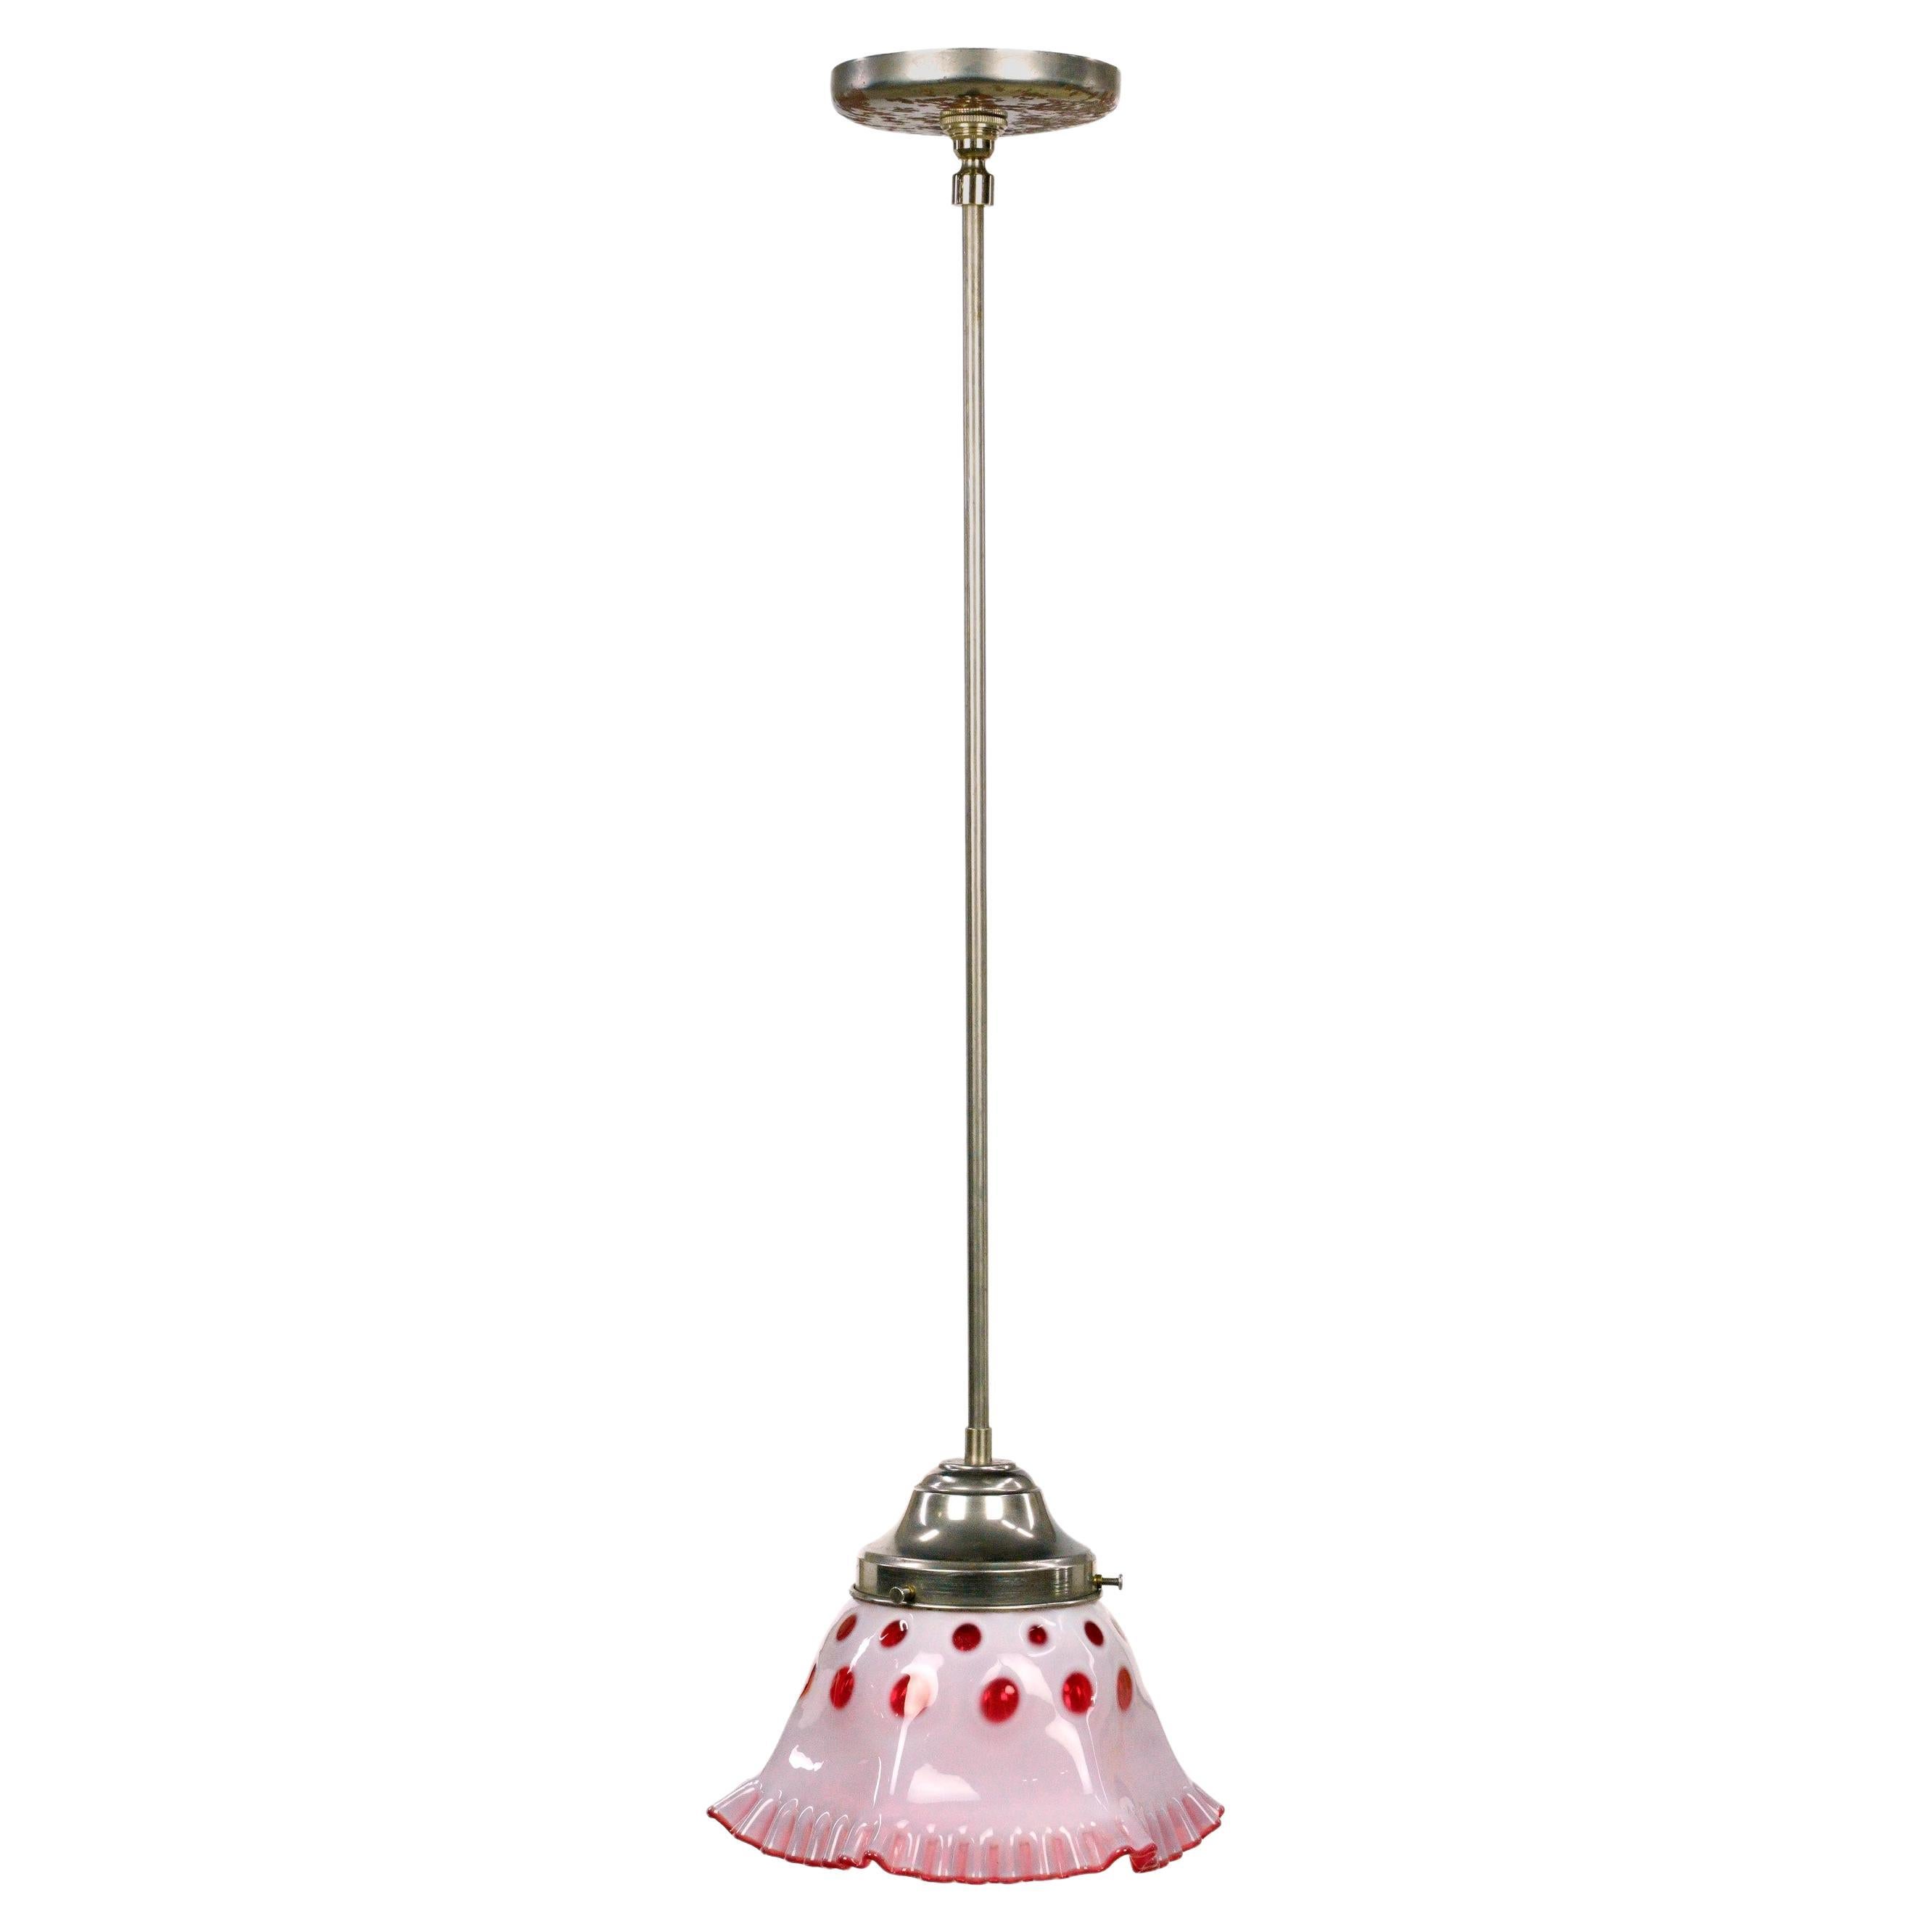 White & Red Glass Pendant Light with Original Hardware For Sale